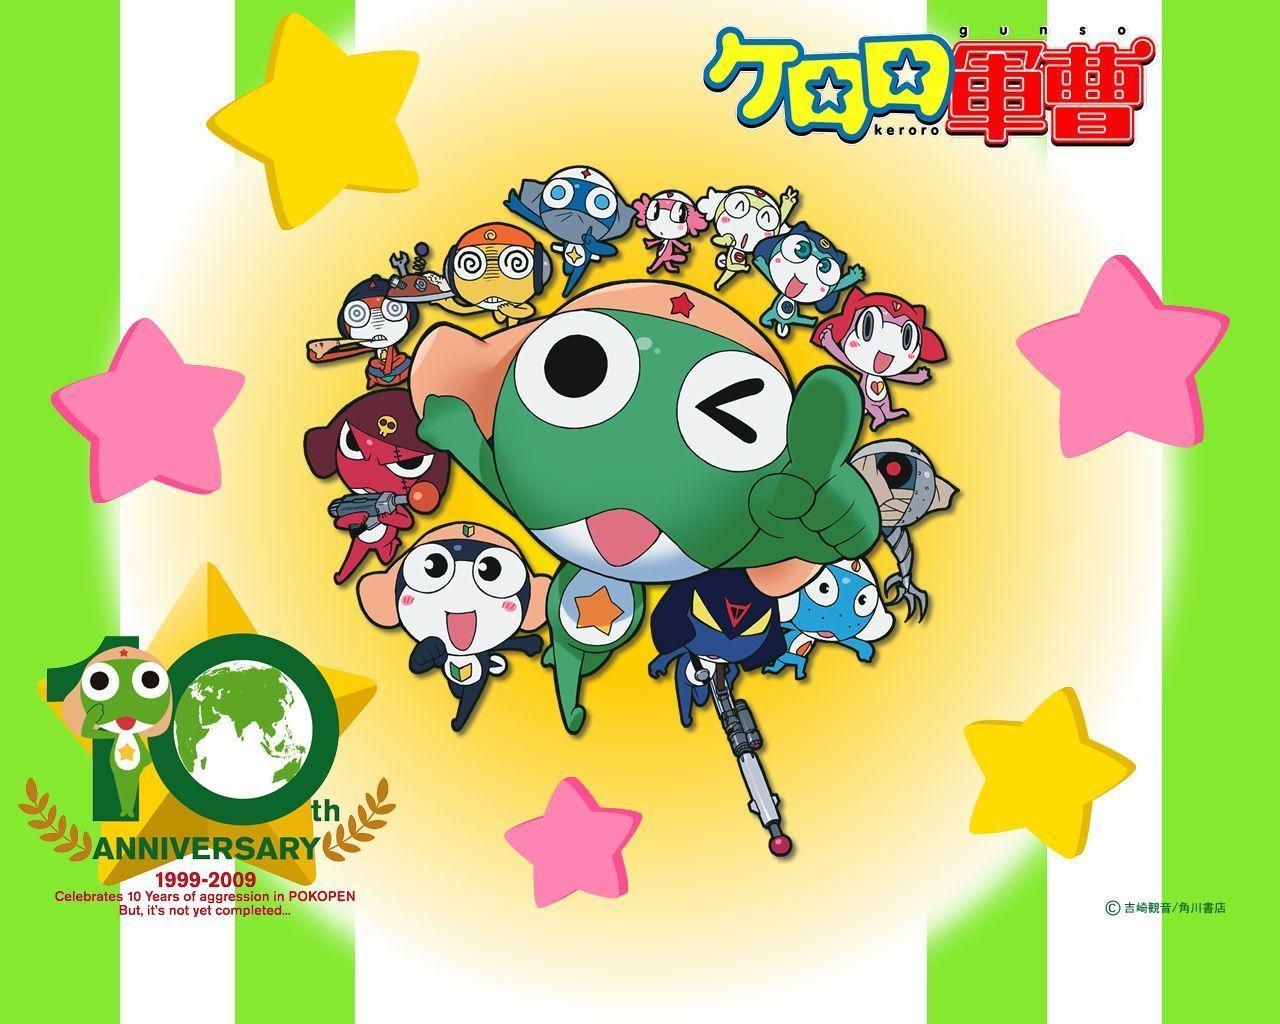 sgt frog wallpaper 4 - Image And Wallpaper free to download